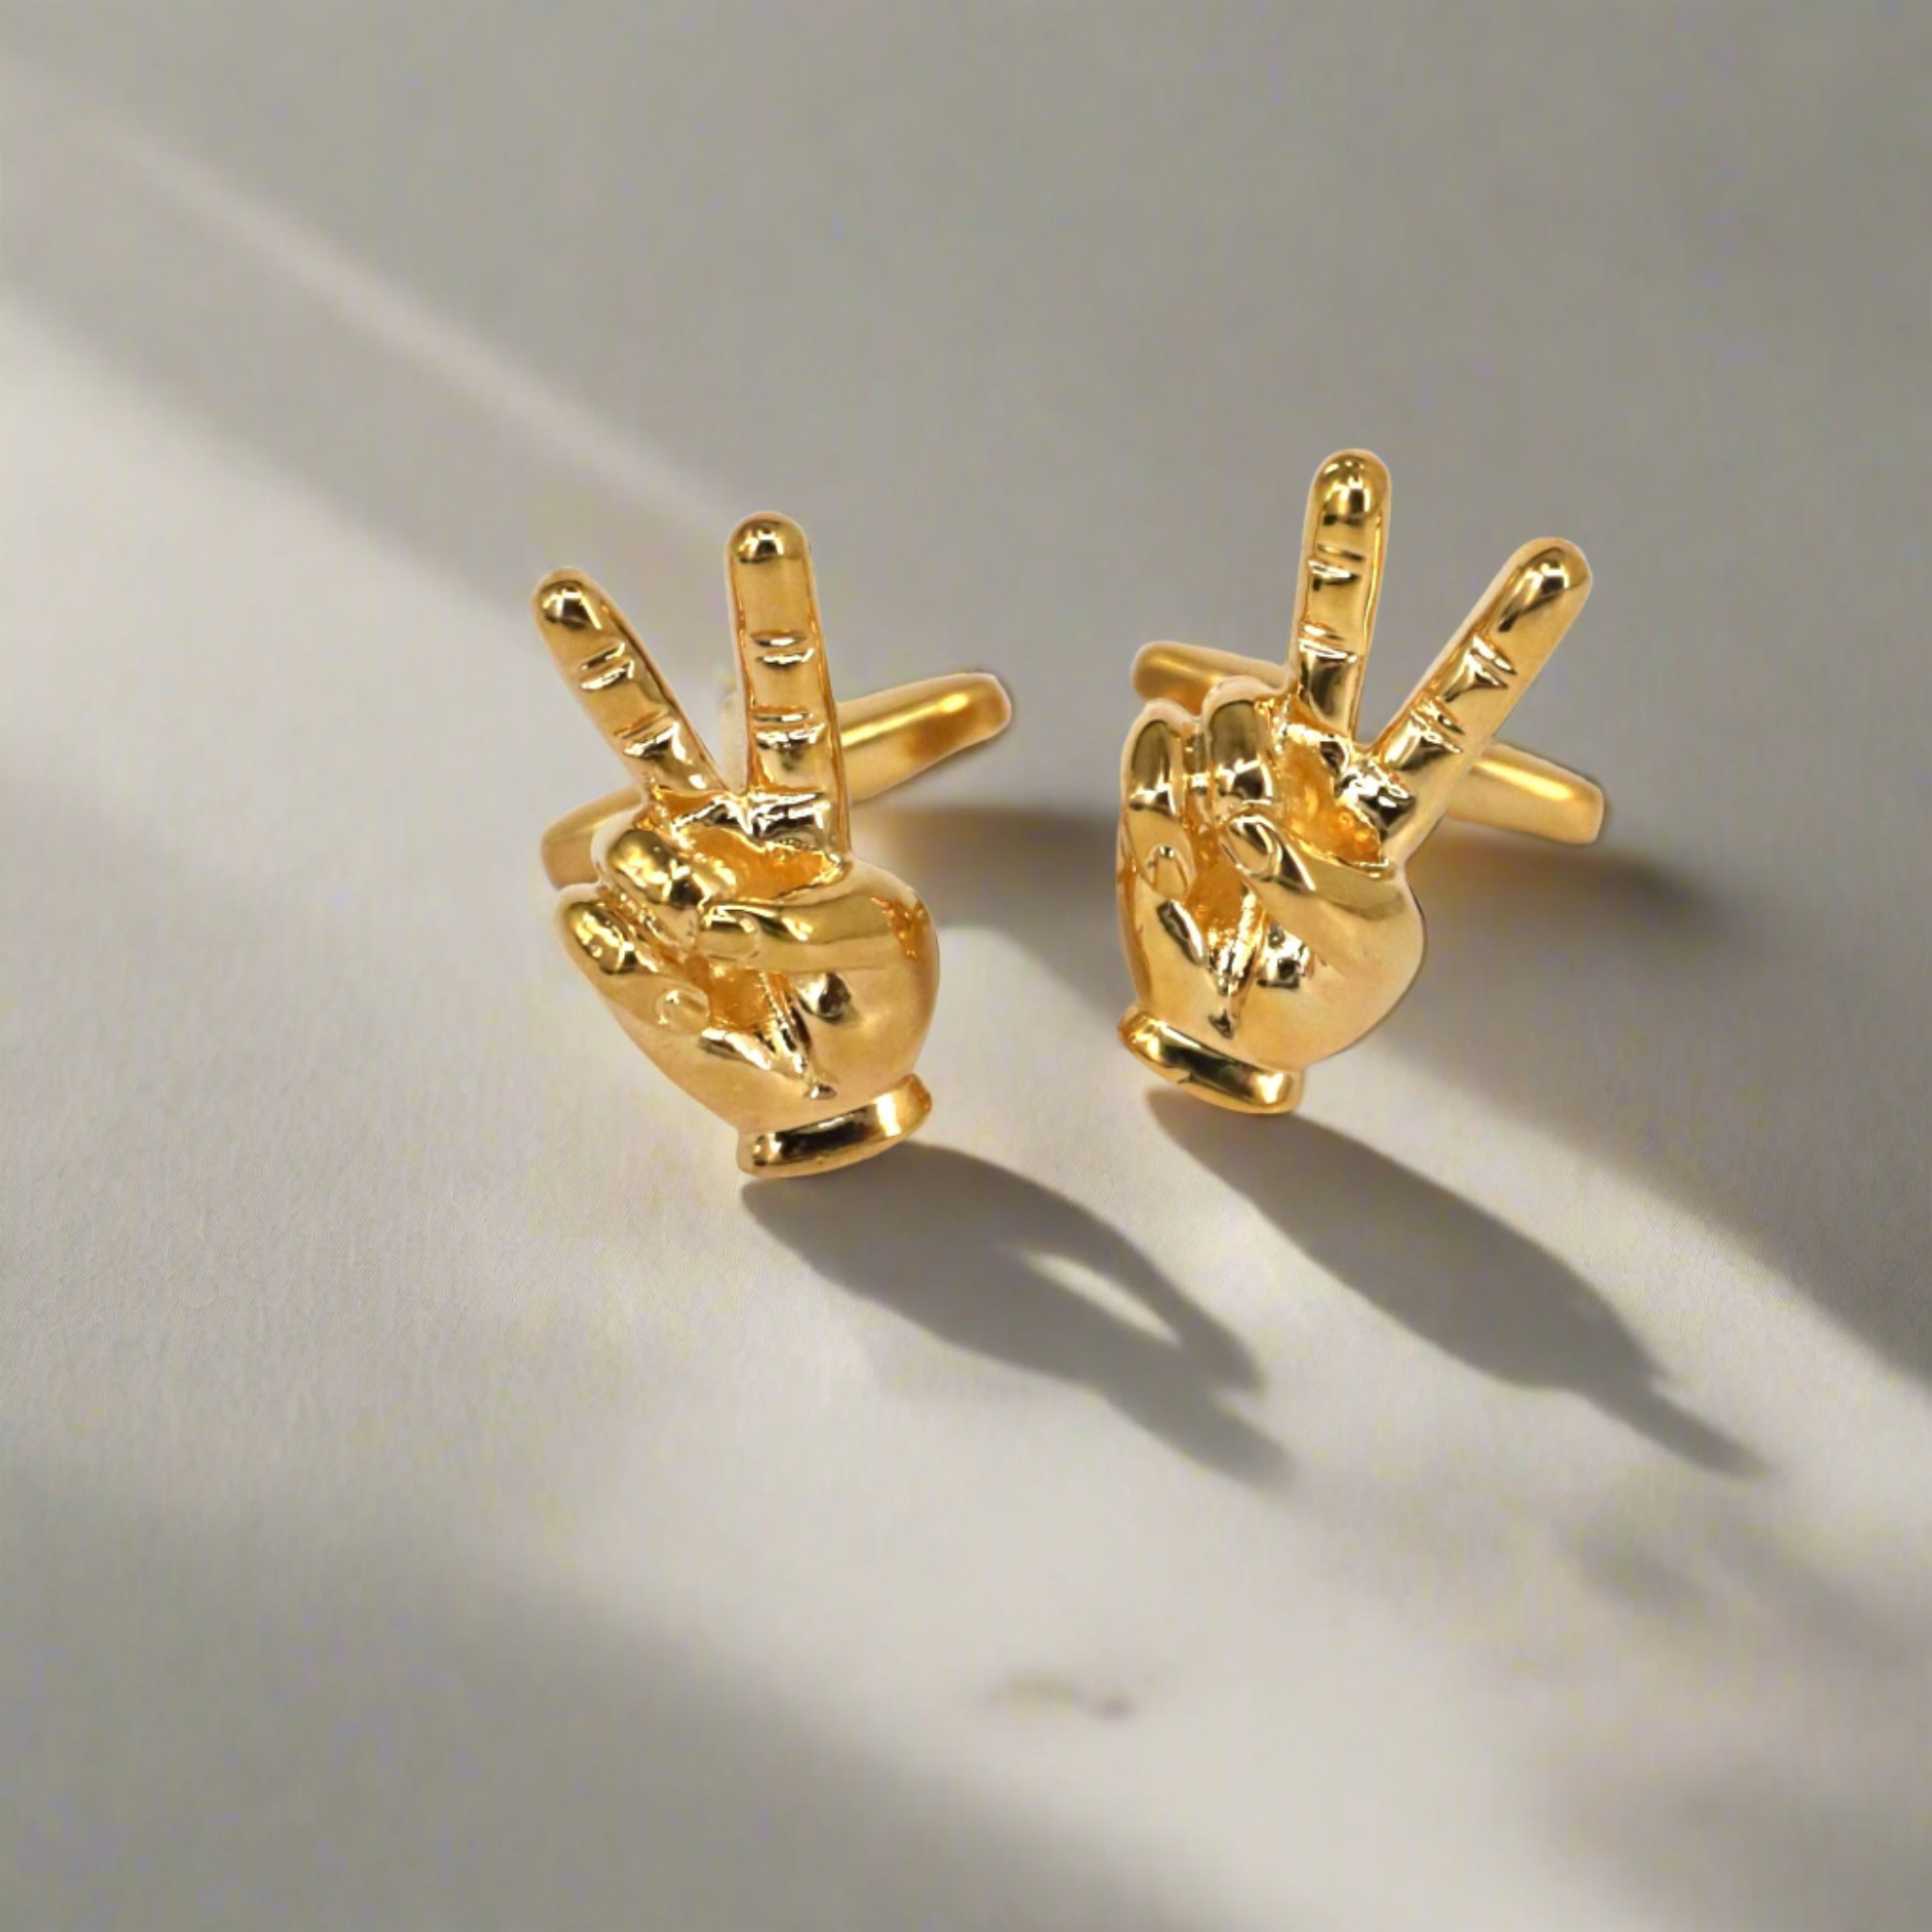 Peace Hand Sign Cufflinks, Victory Hand Sign Cufflinks Gold (Online Exclusive)